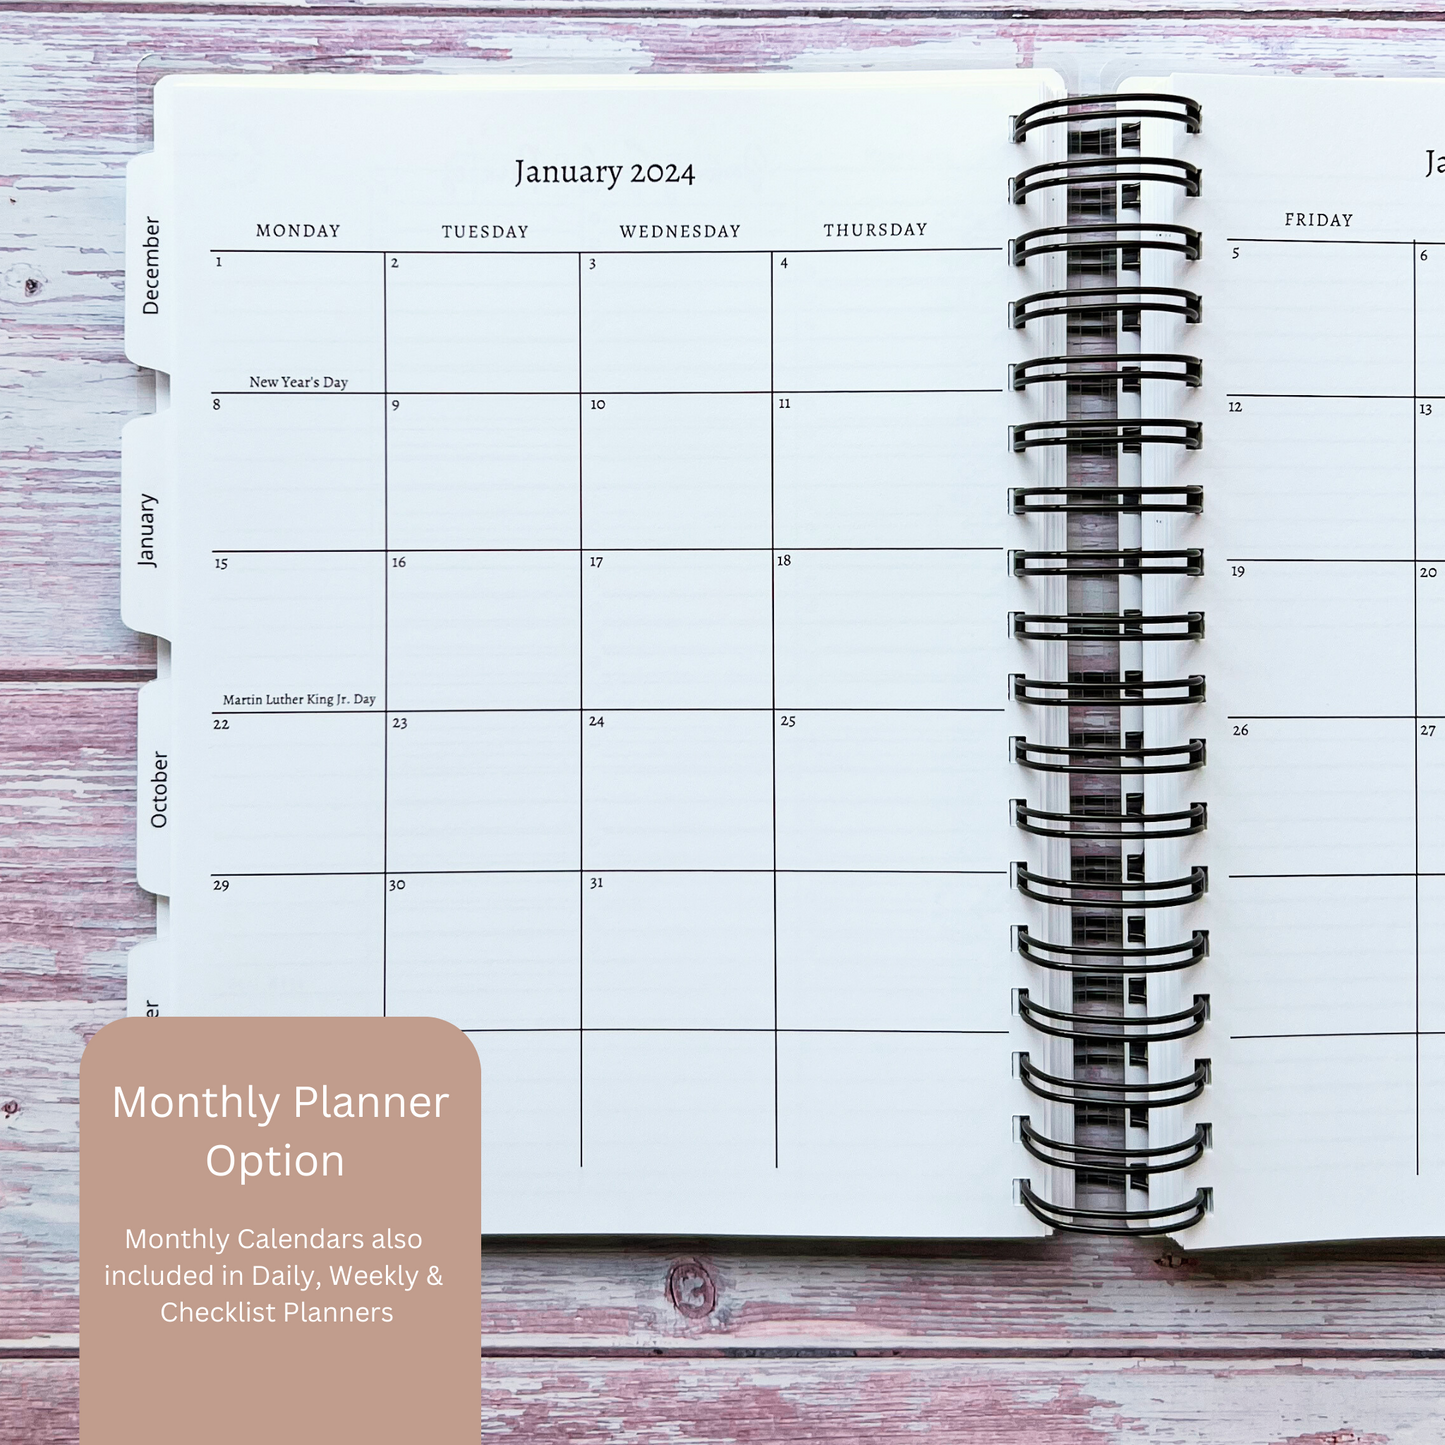 Personalized Weekly Planner | Abstract Moonlit Sea